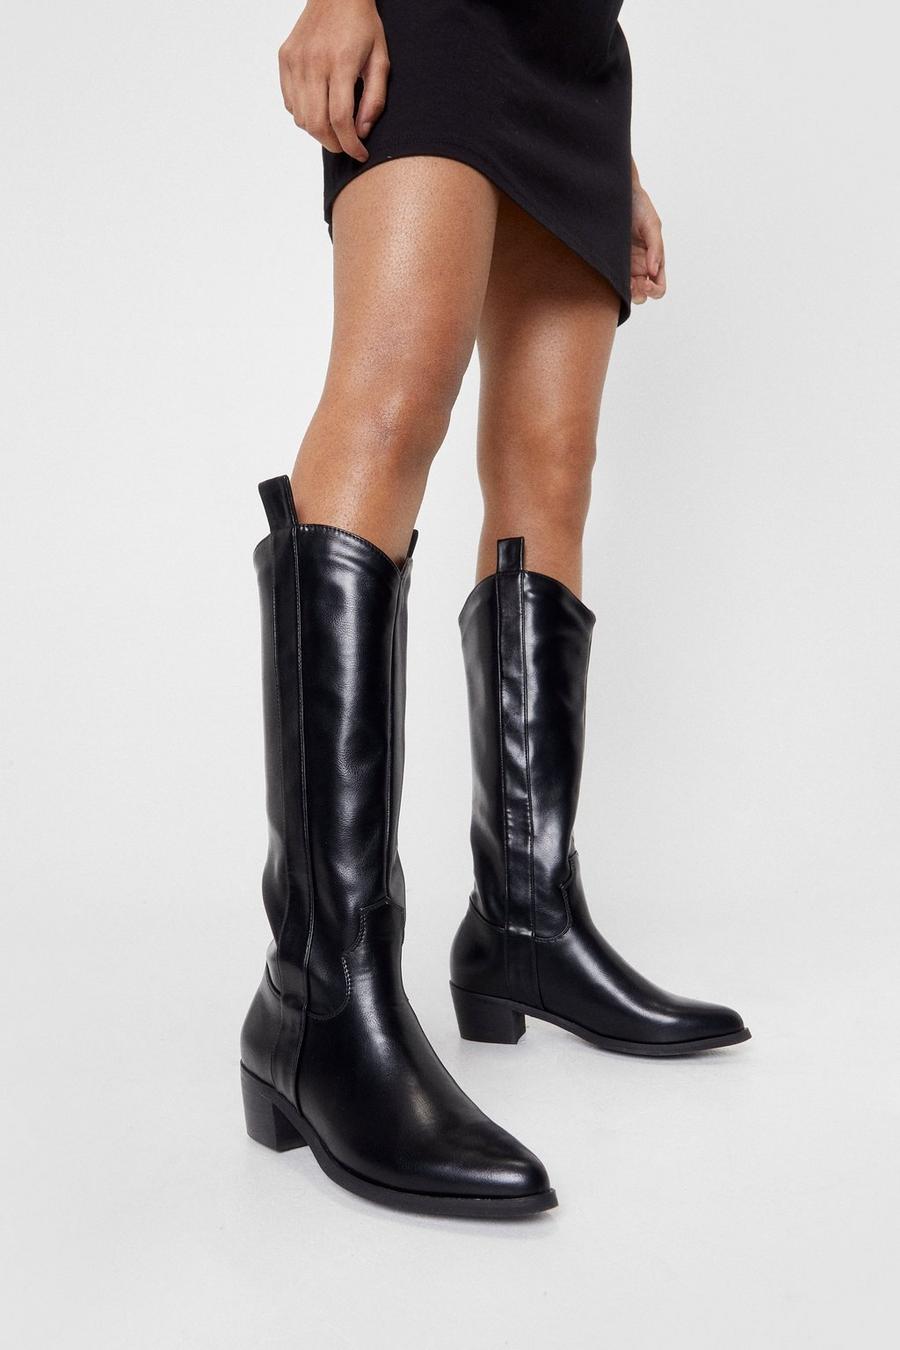 Black Faux Leather Western Knee High Boots